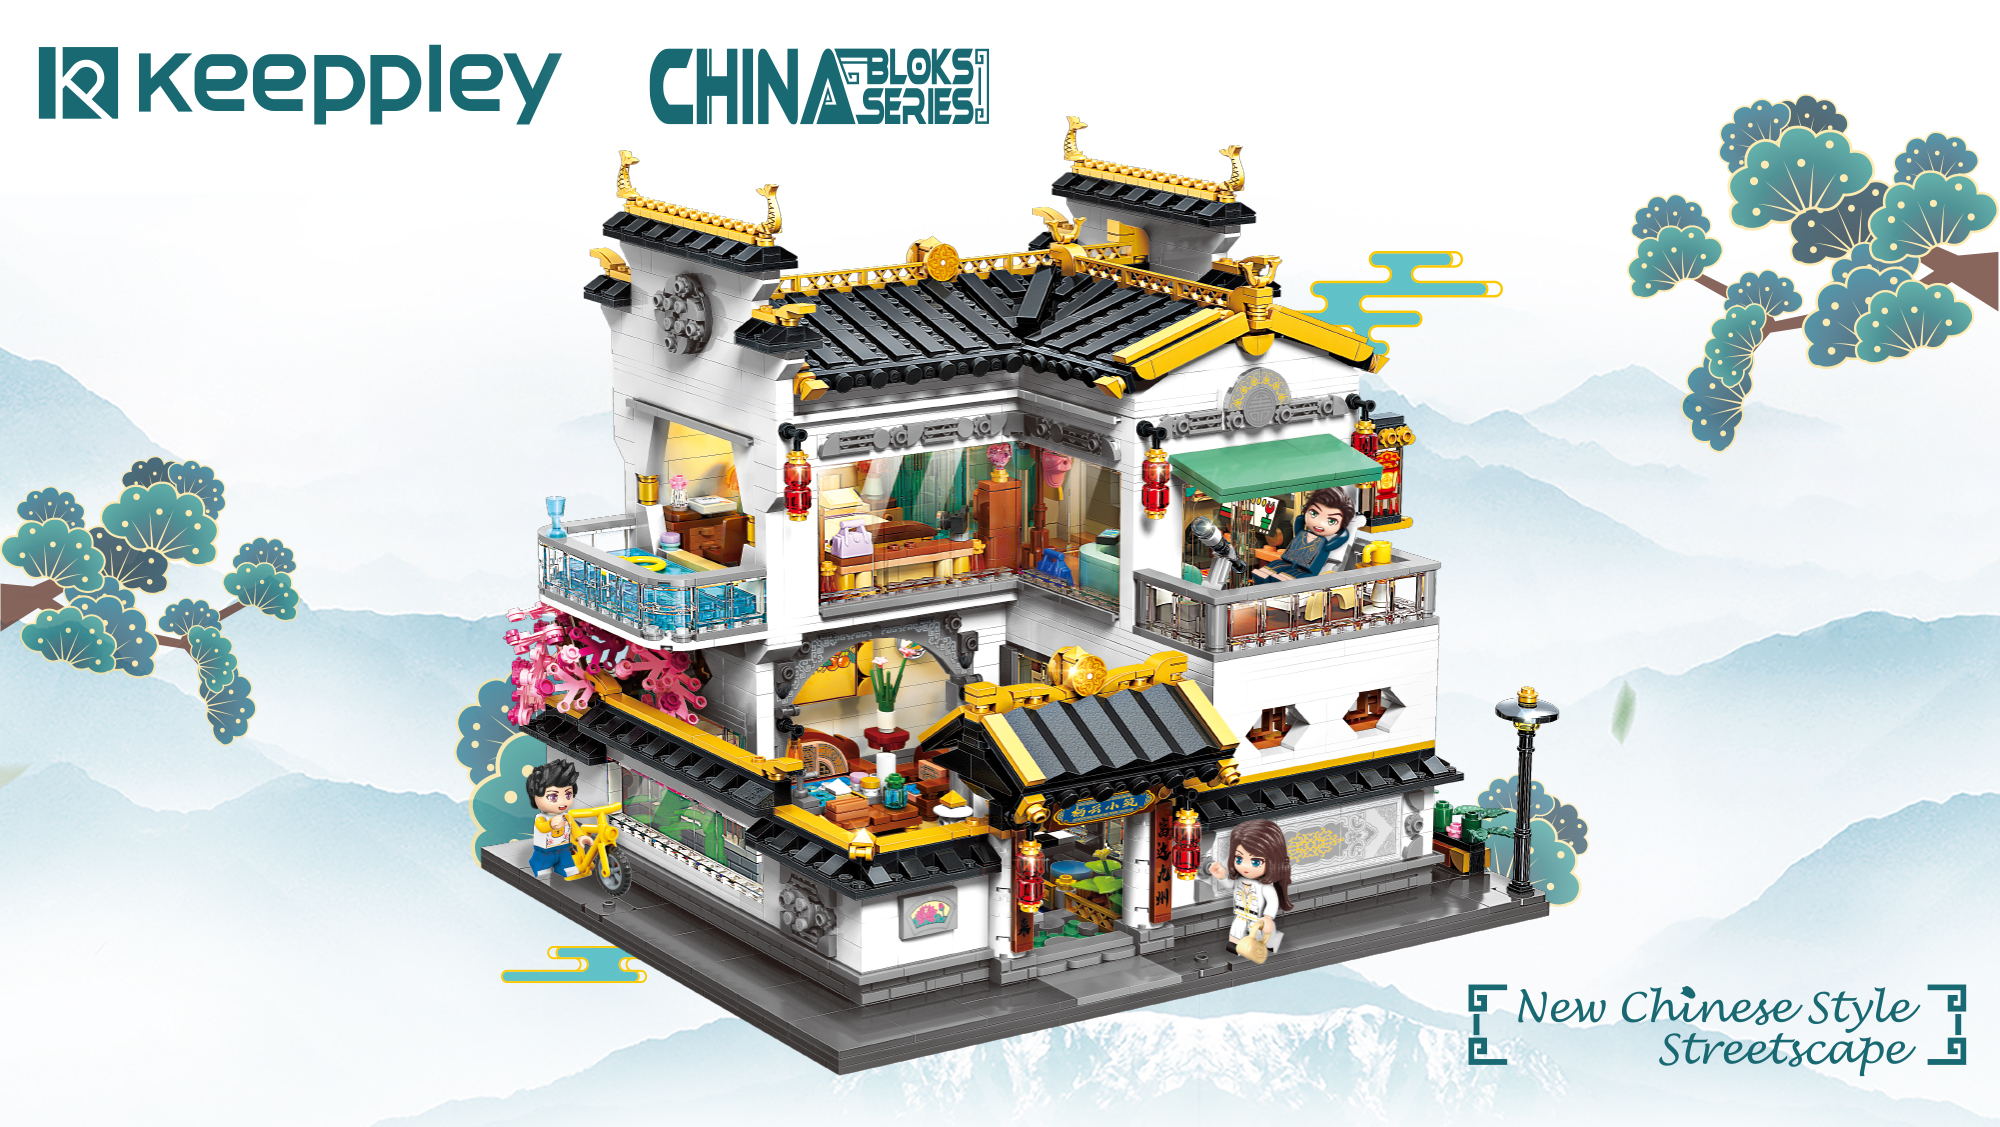 New Chinese Style Streetscape